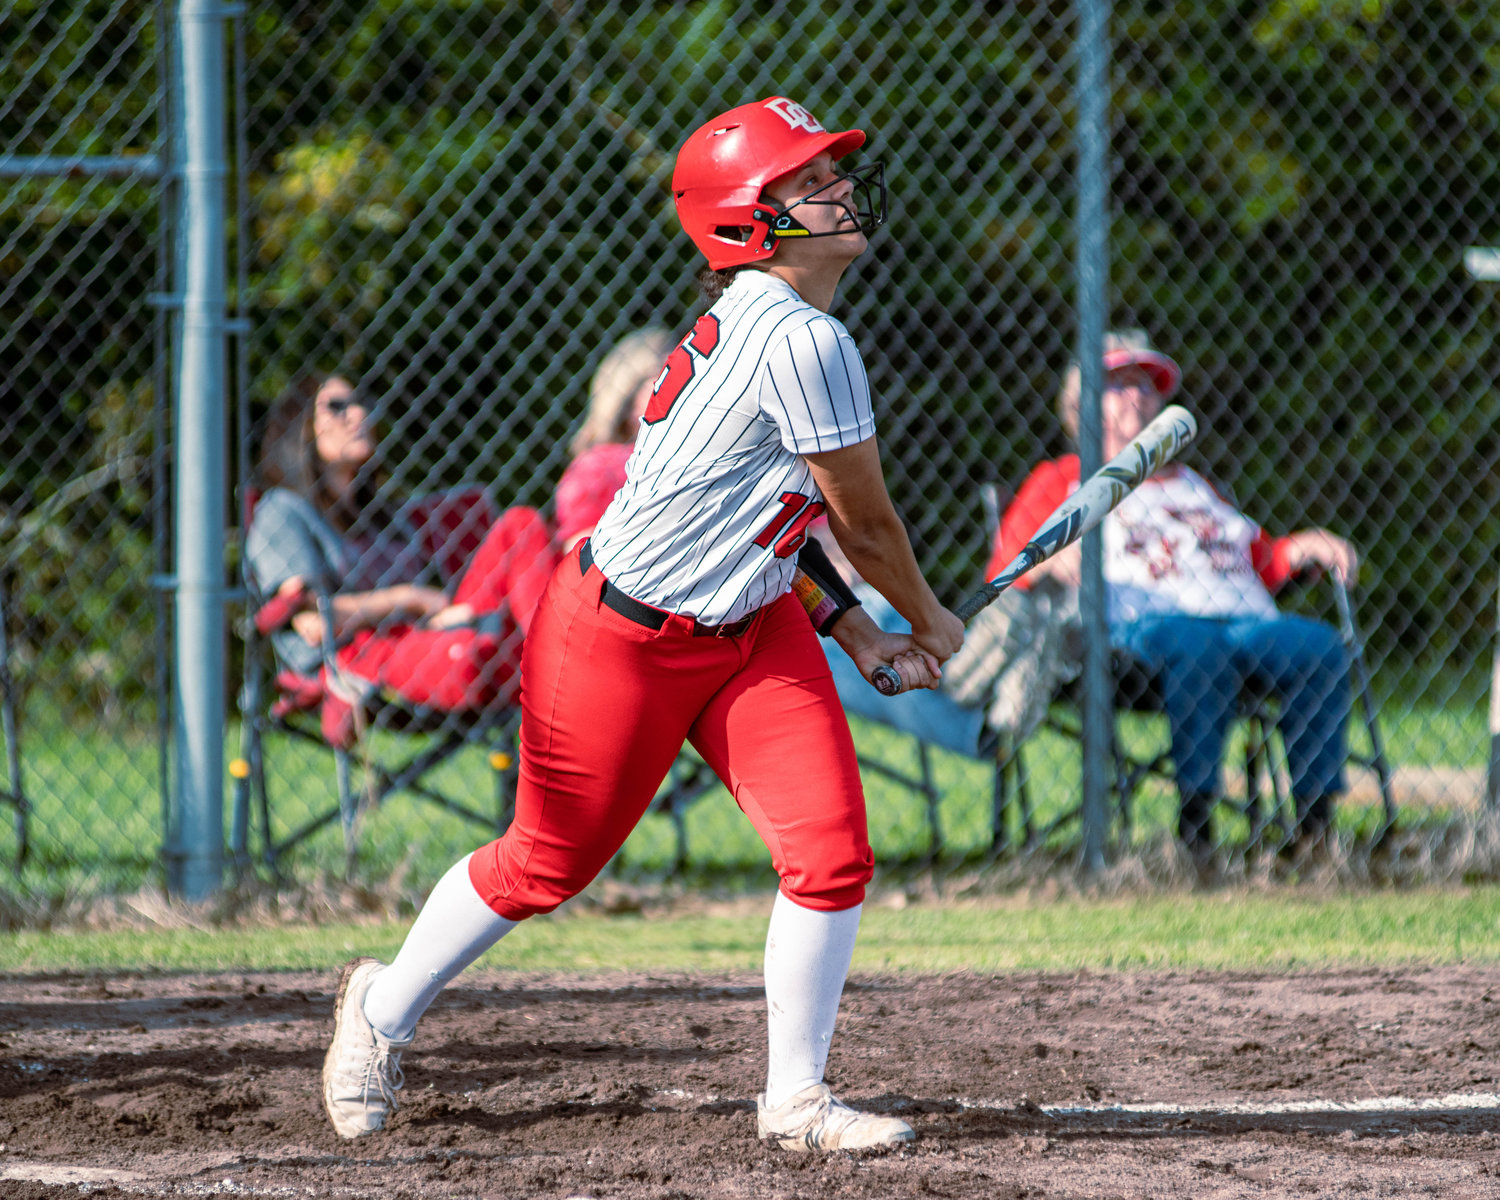 ZOE JOHNSON connected for a walk-off Grand-Slam Thursday against McGehee to give the Lady Pirates a 14-1 victory and sealed the teams appearance in the 3A Region 4 Regional Tournament.